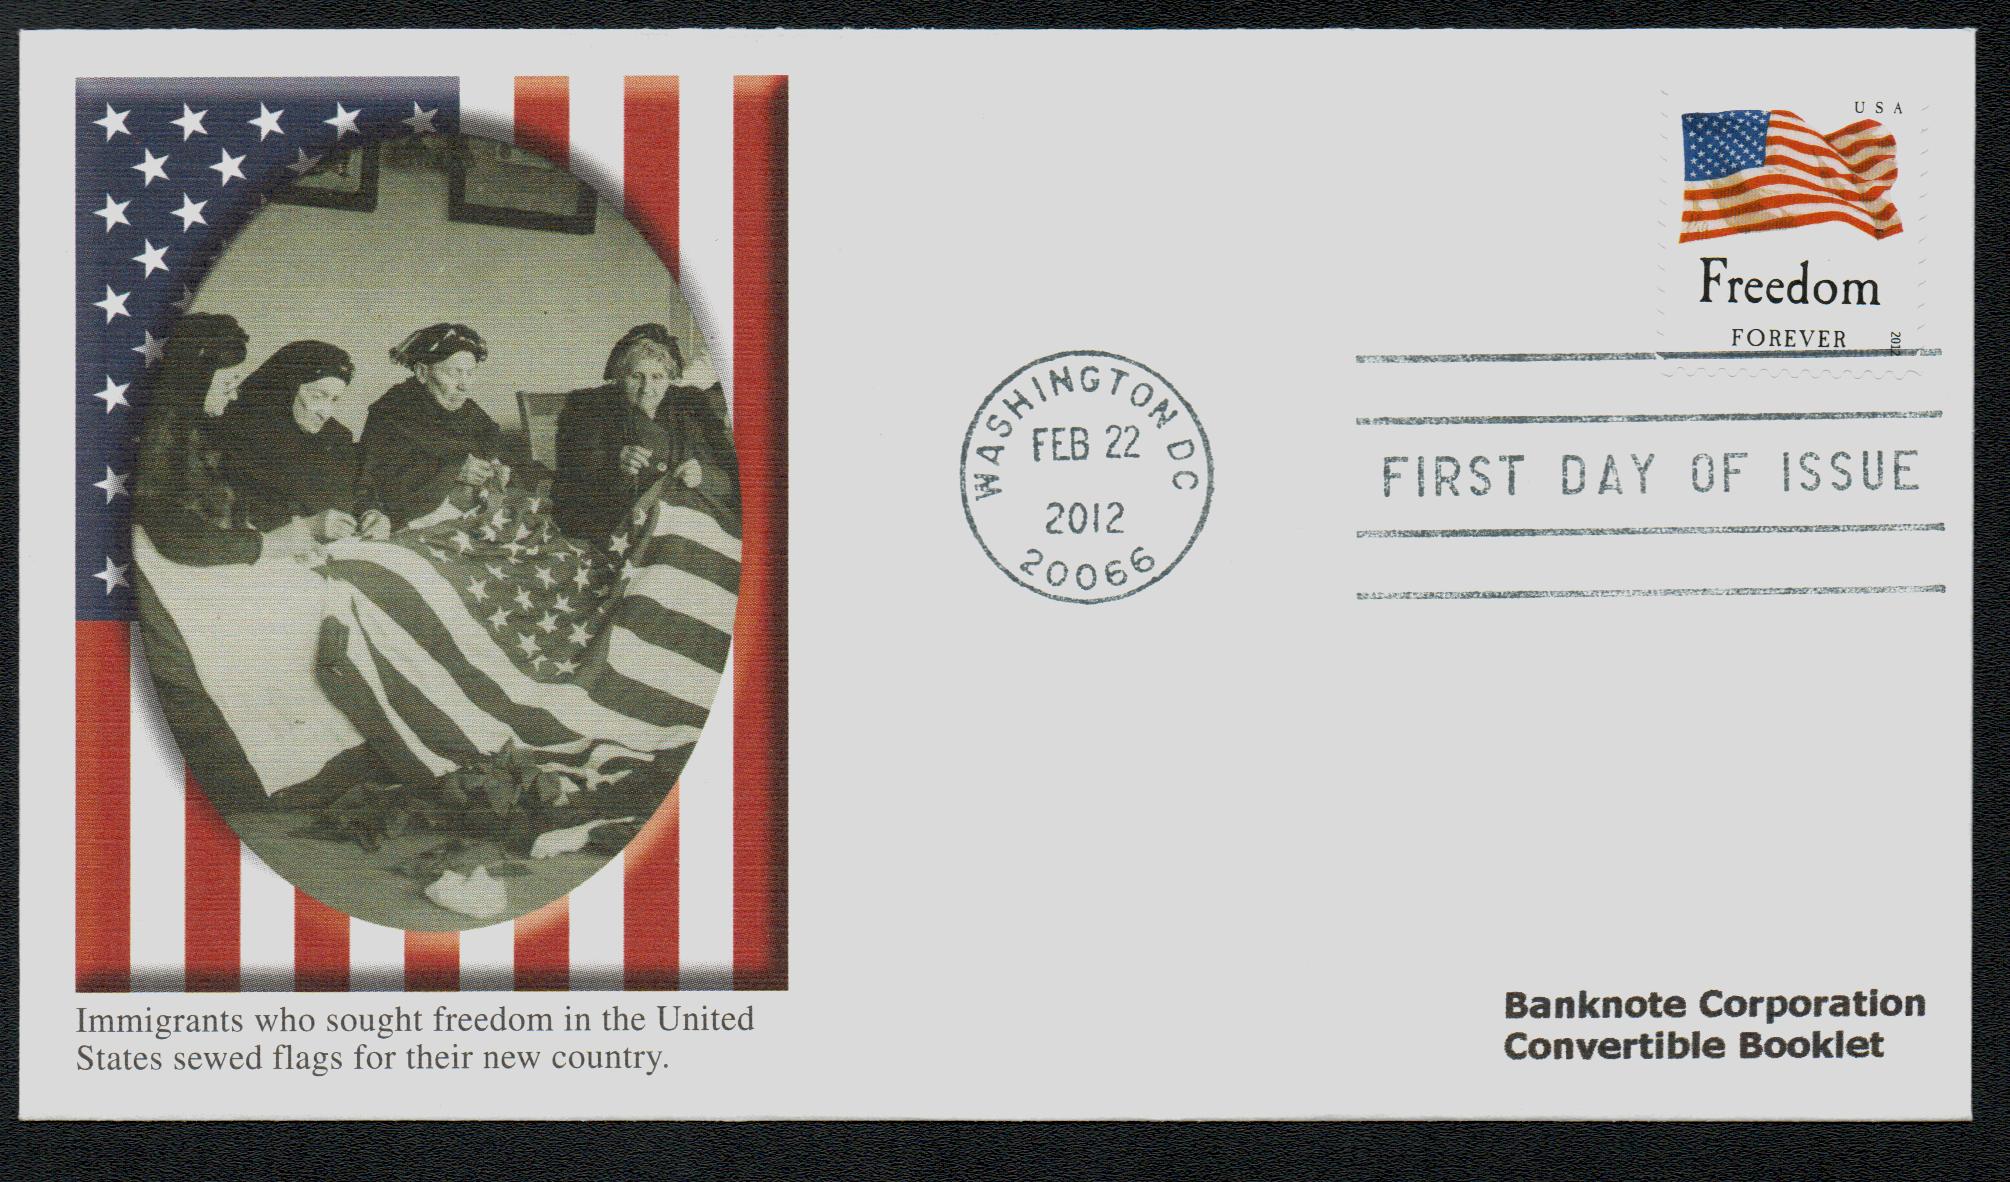 4646 - 2012 First-Class Forever Stamp - Flag and Liberty with Dark Dots  in Star (Sennett Security Products)